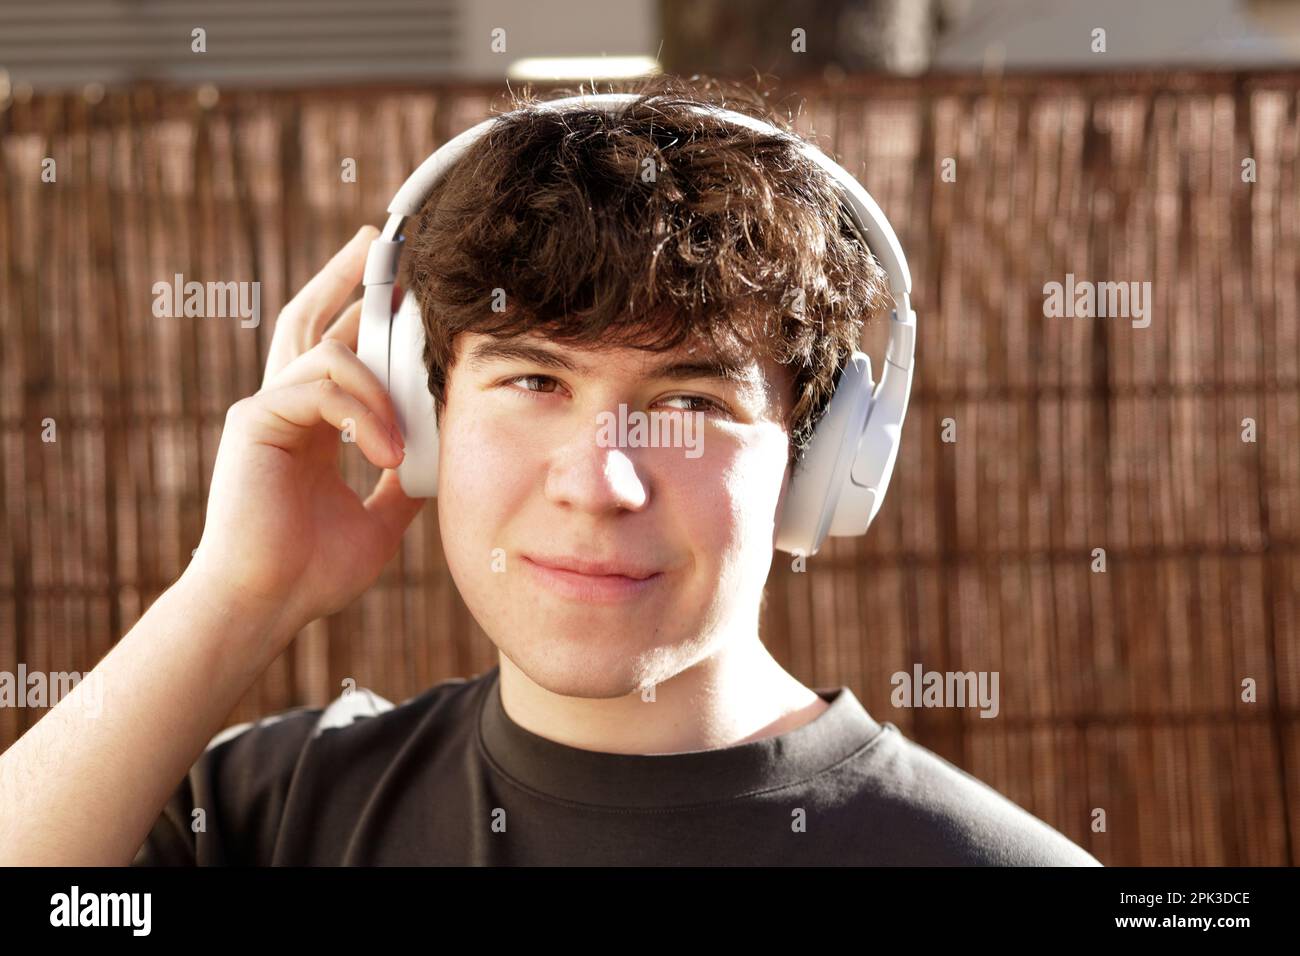 boy with headphones looking at camera Stock Photo